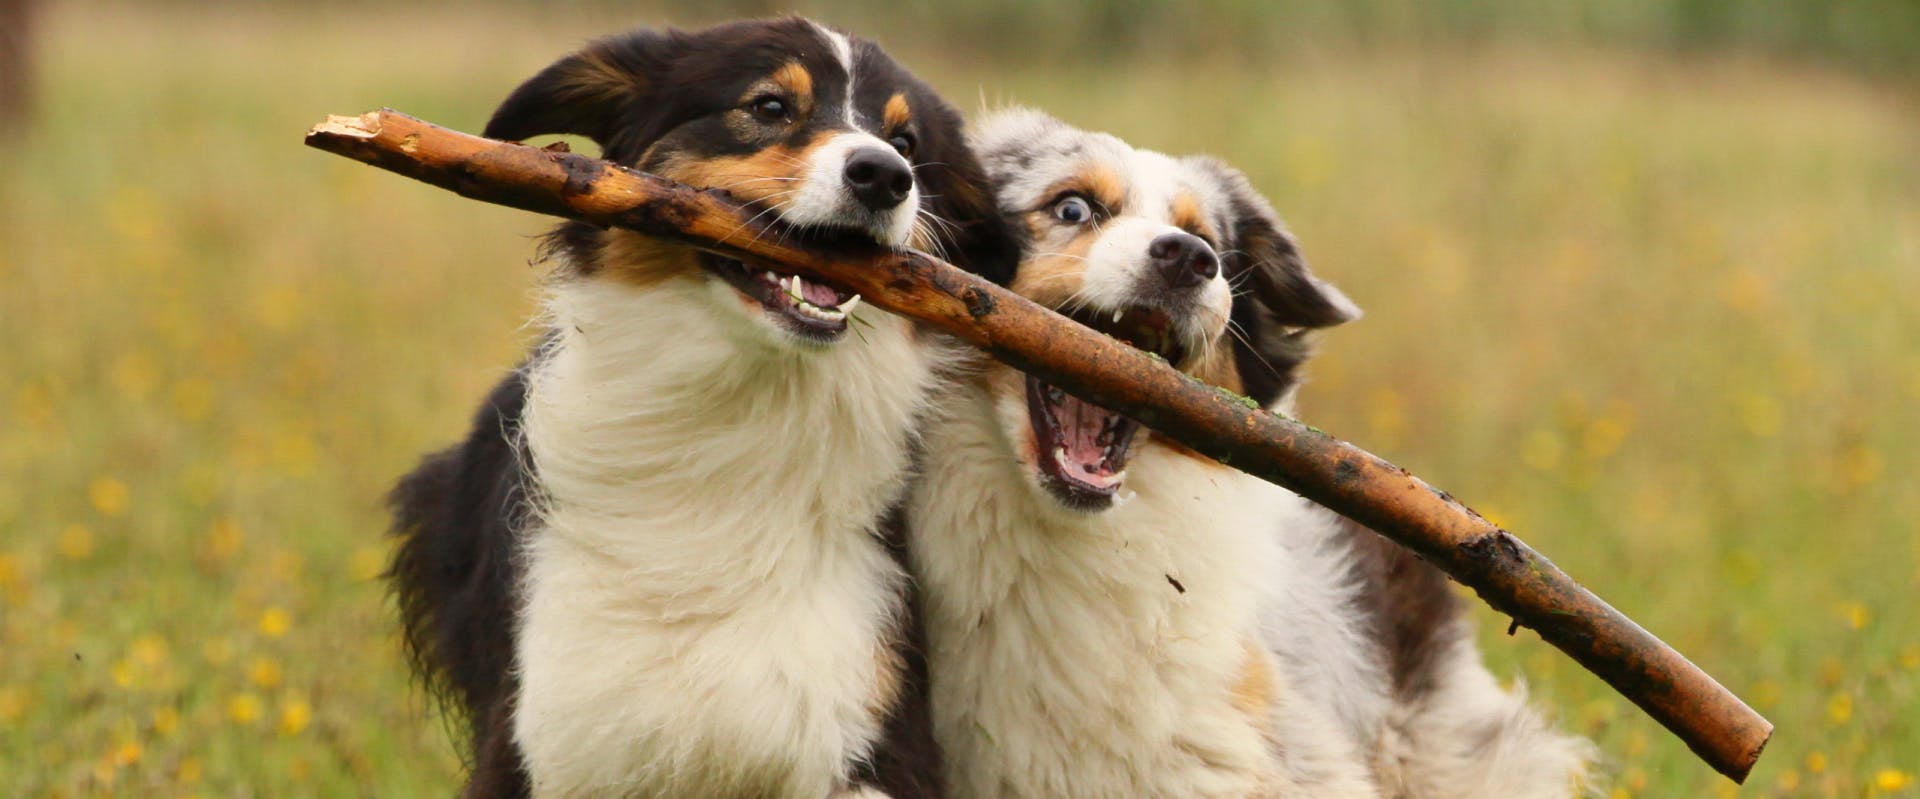 two dogs running through a field holding a big stick